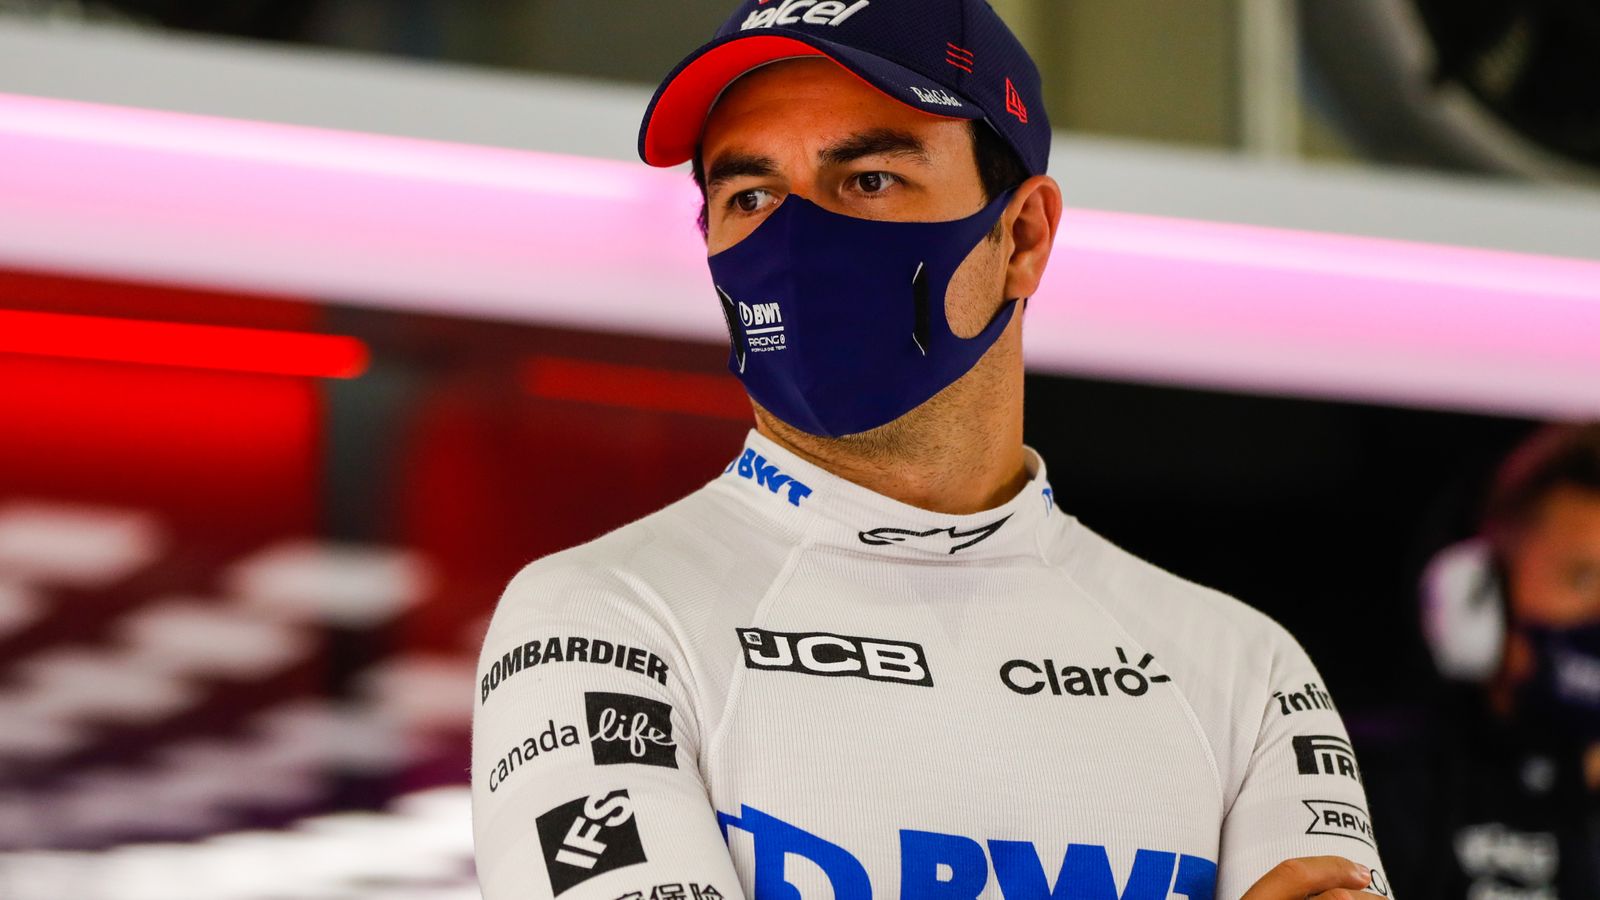 COVID-19: Racing Point driver, Sergio Perez tests positive